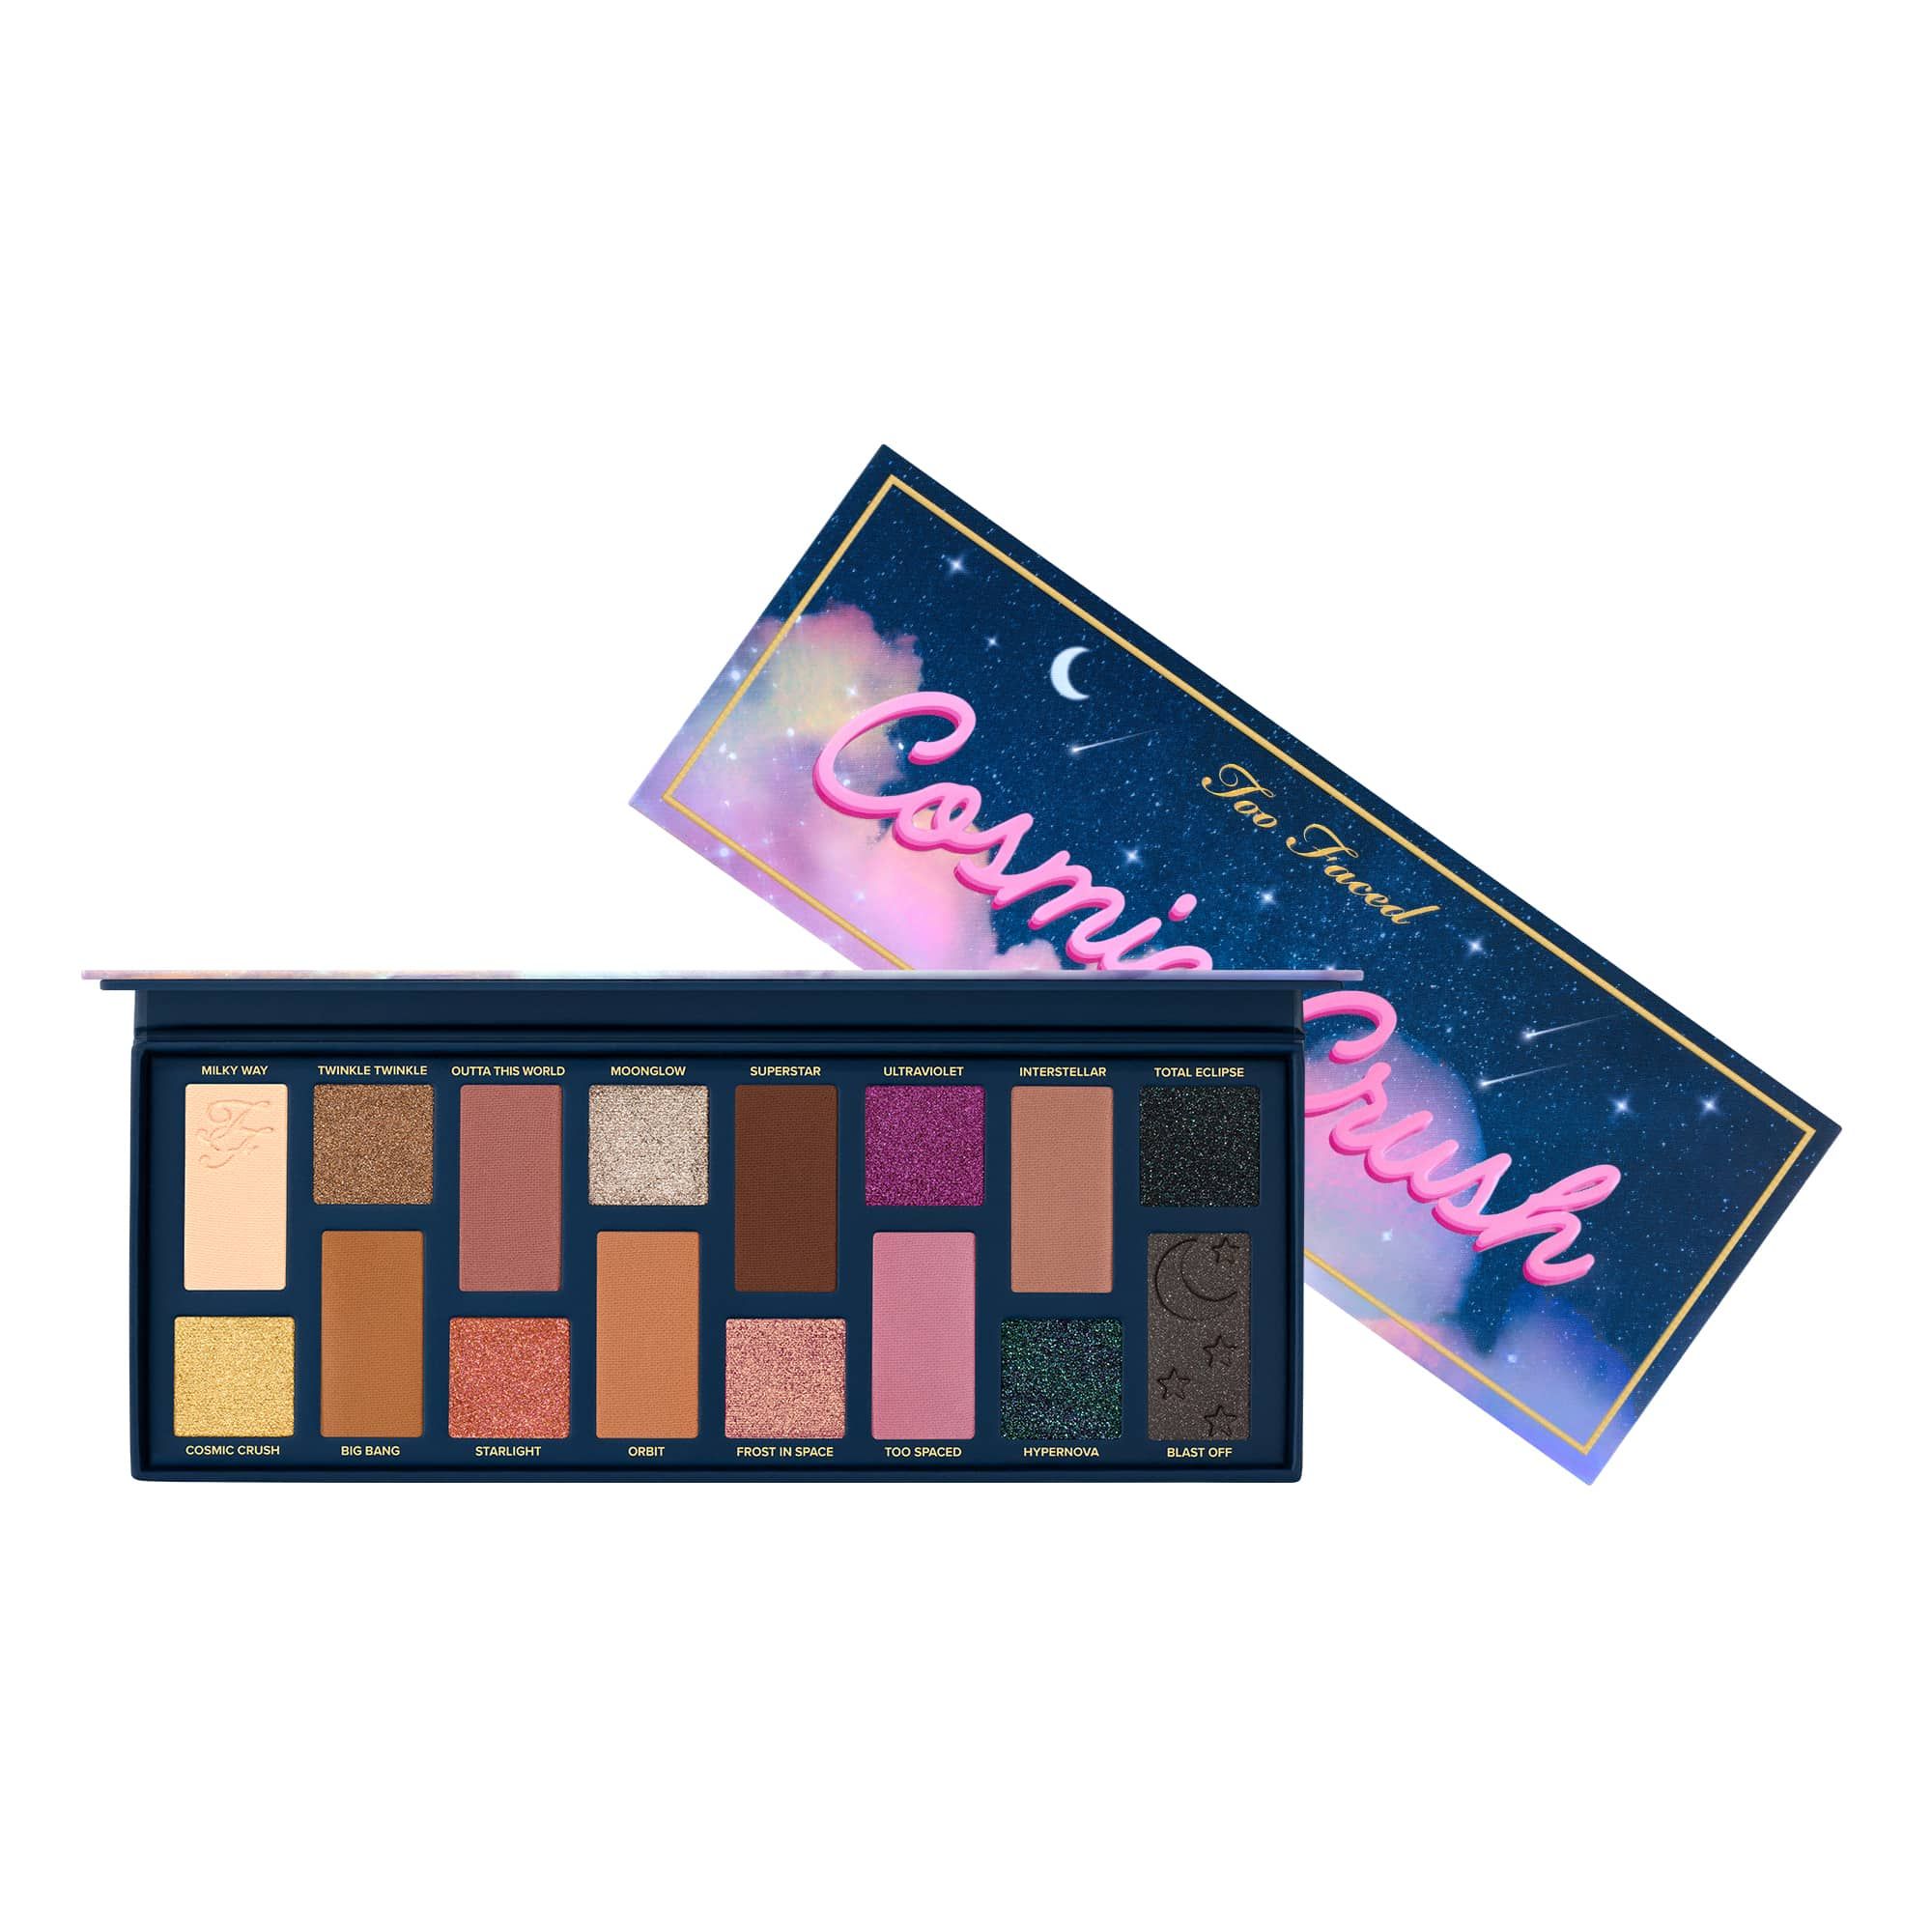 Cosmic Crush High-Pigment Futuristic Eye Shadow Palette | Too Faced US